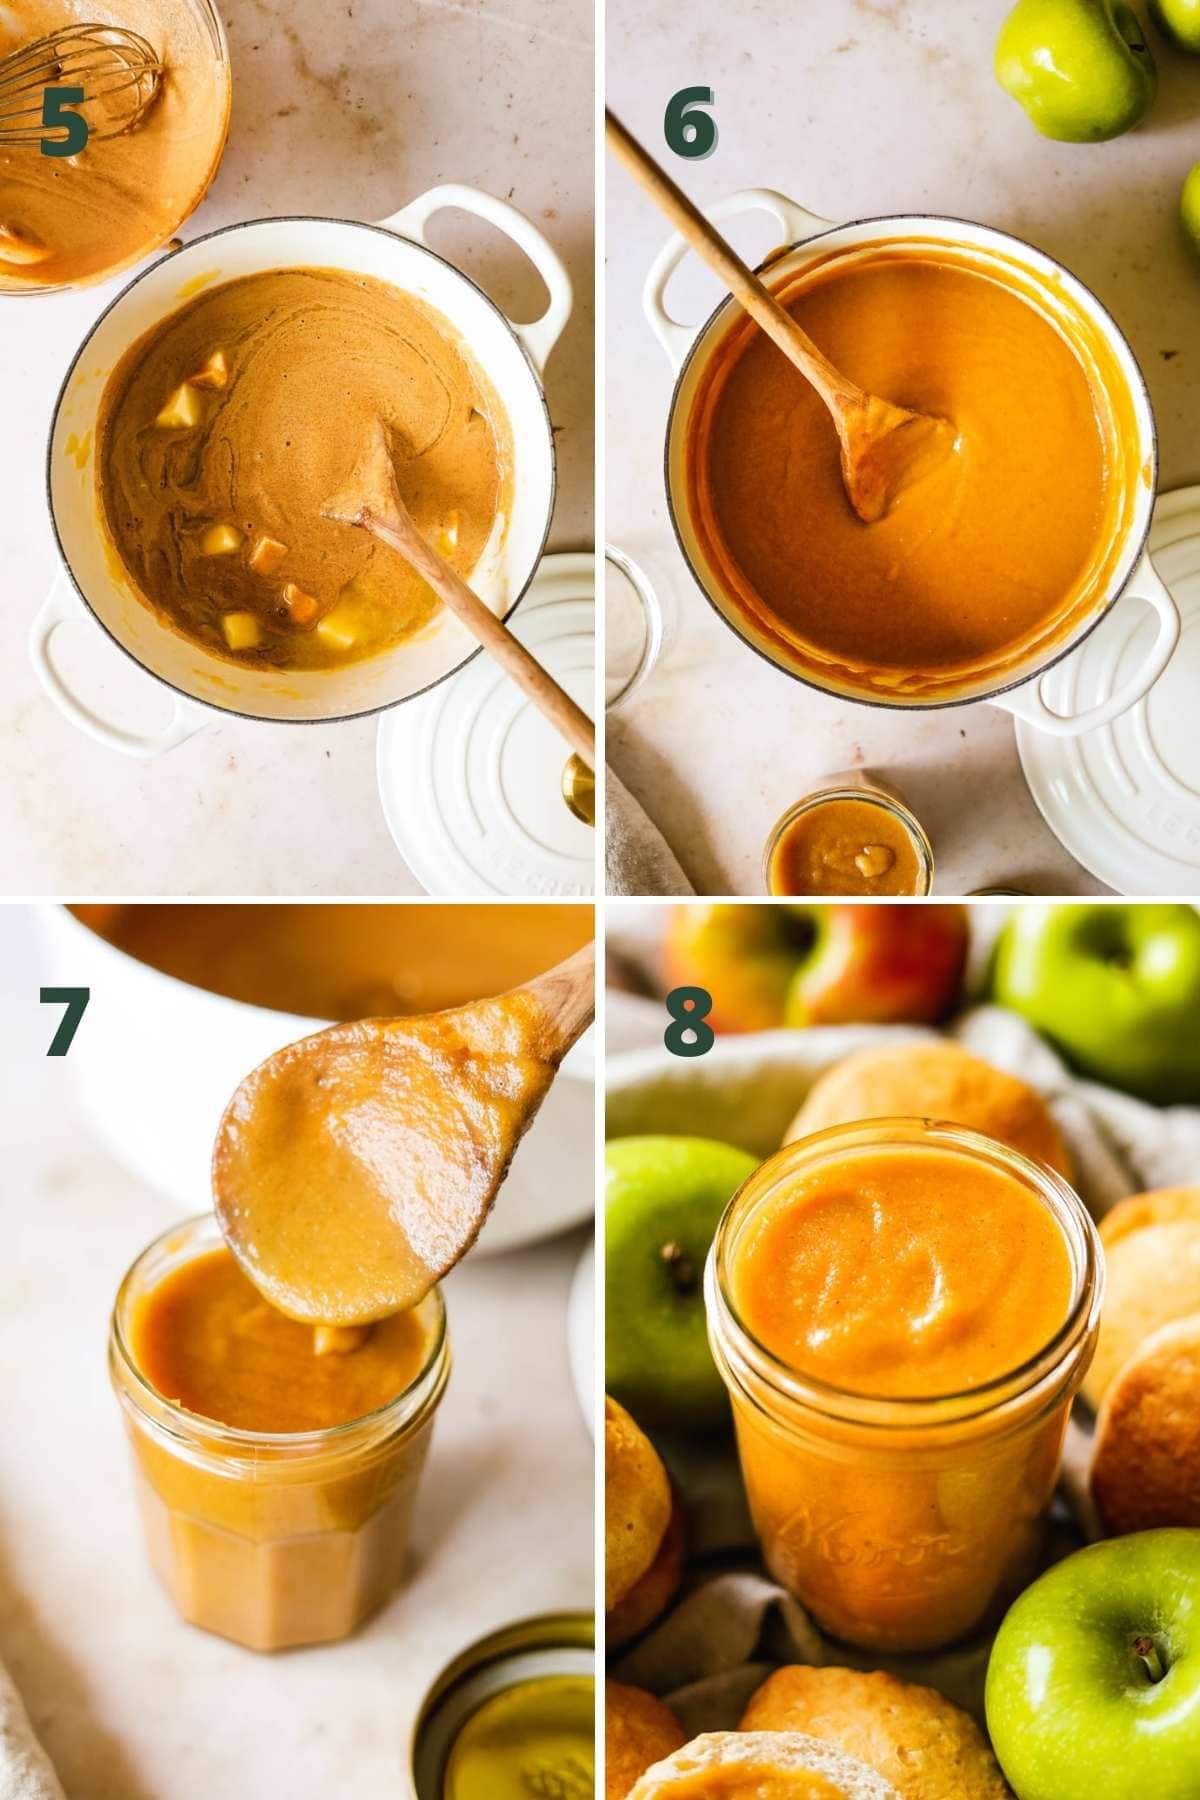 Steps to make easy apple curd, including mixing butter in apples and sugar and pouring the curd into jars.